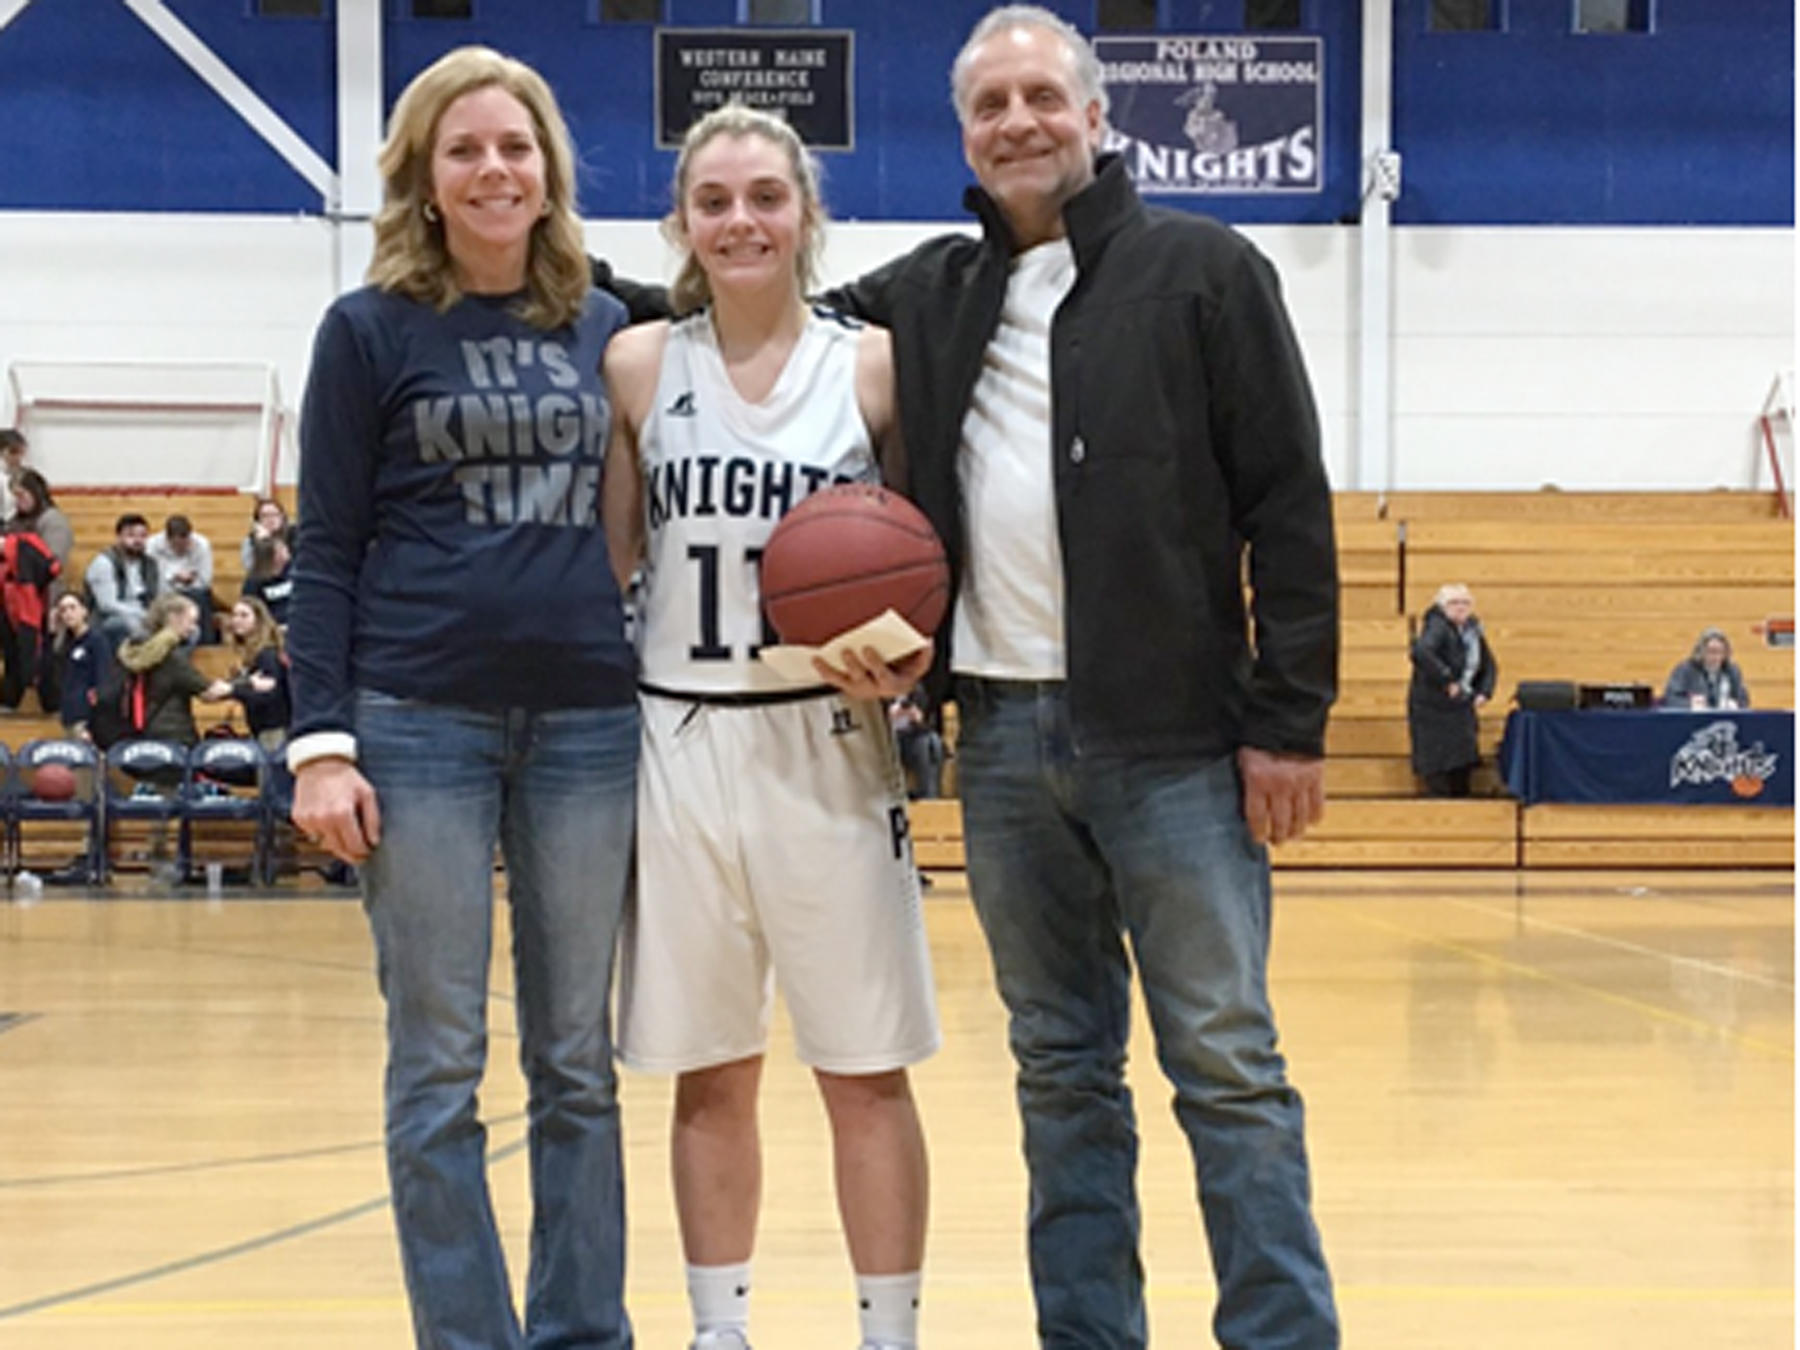 PRHS Basketball Player with her parents